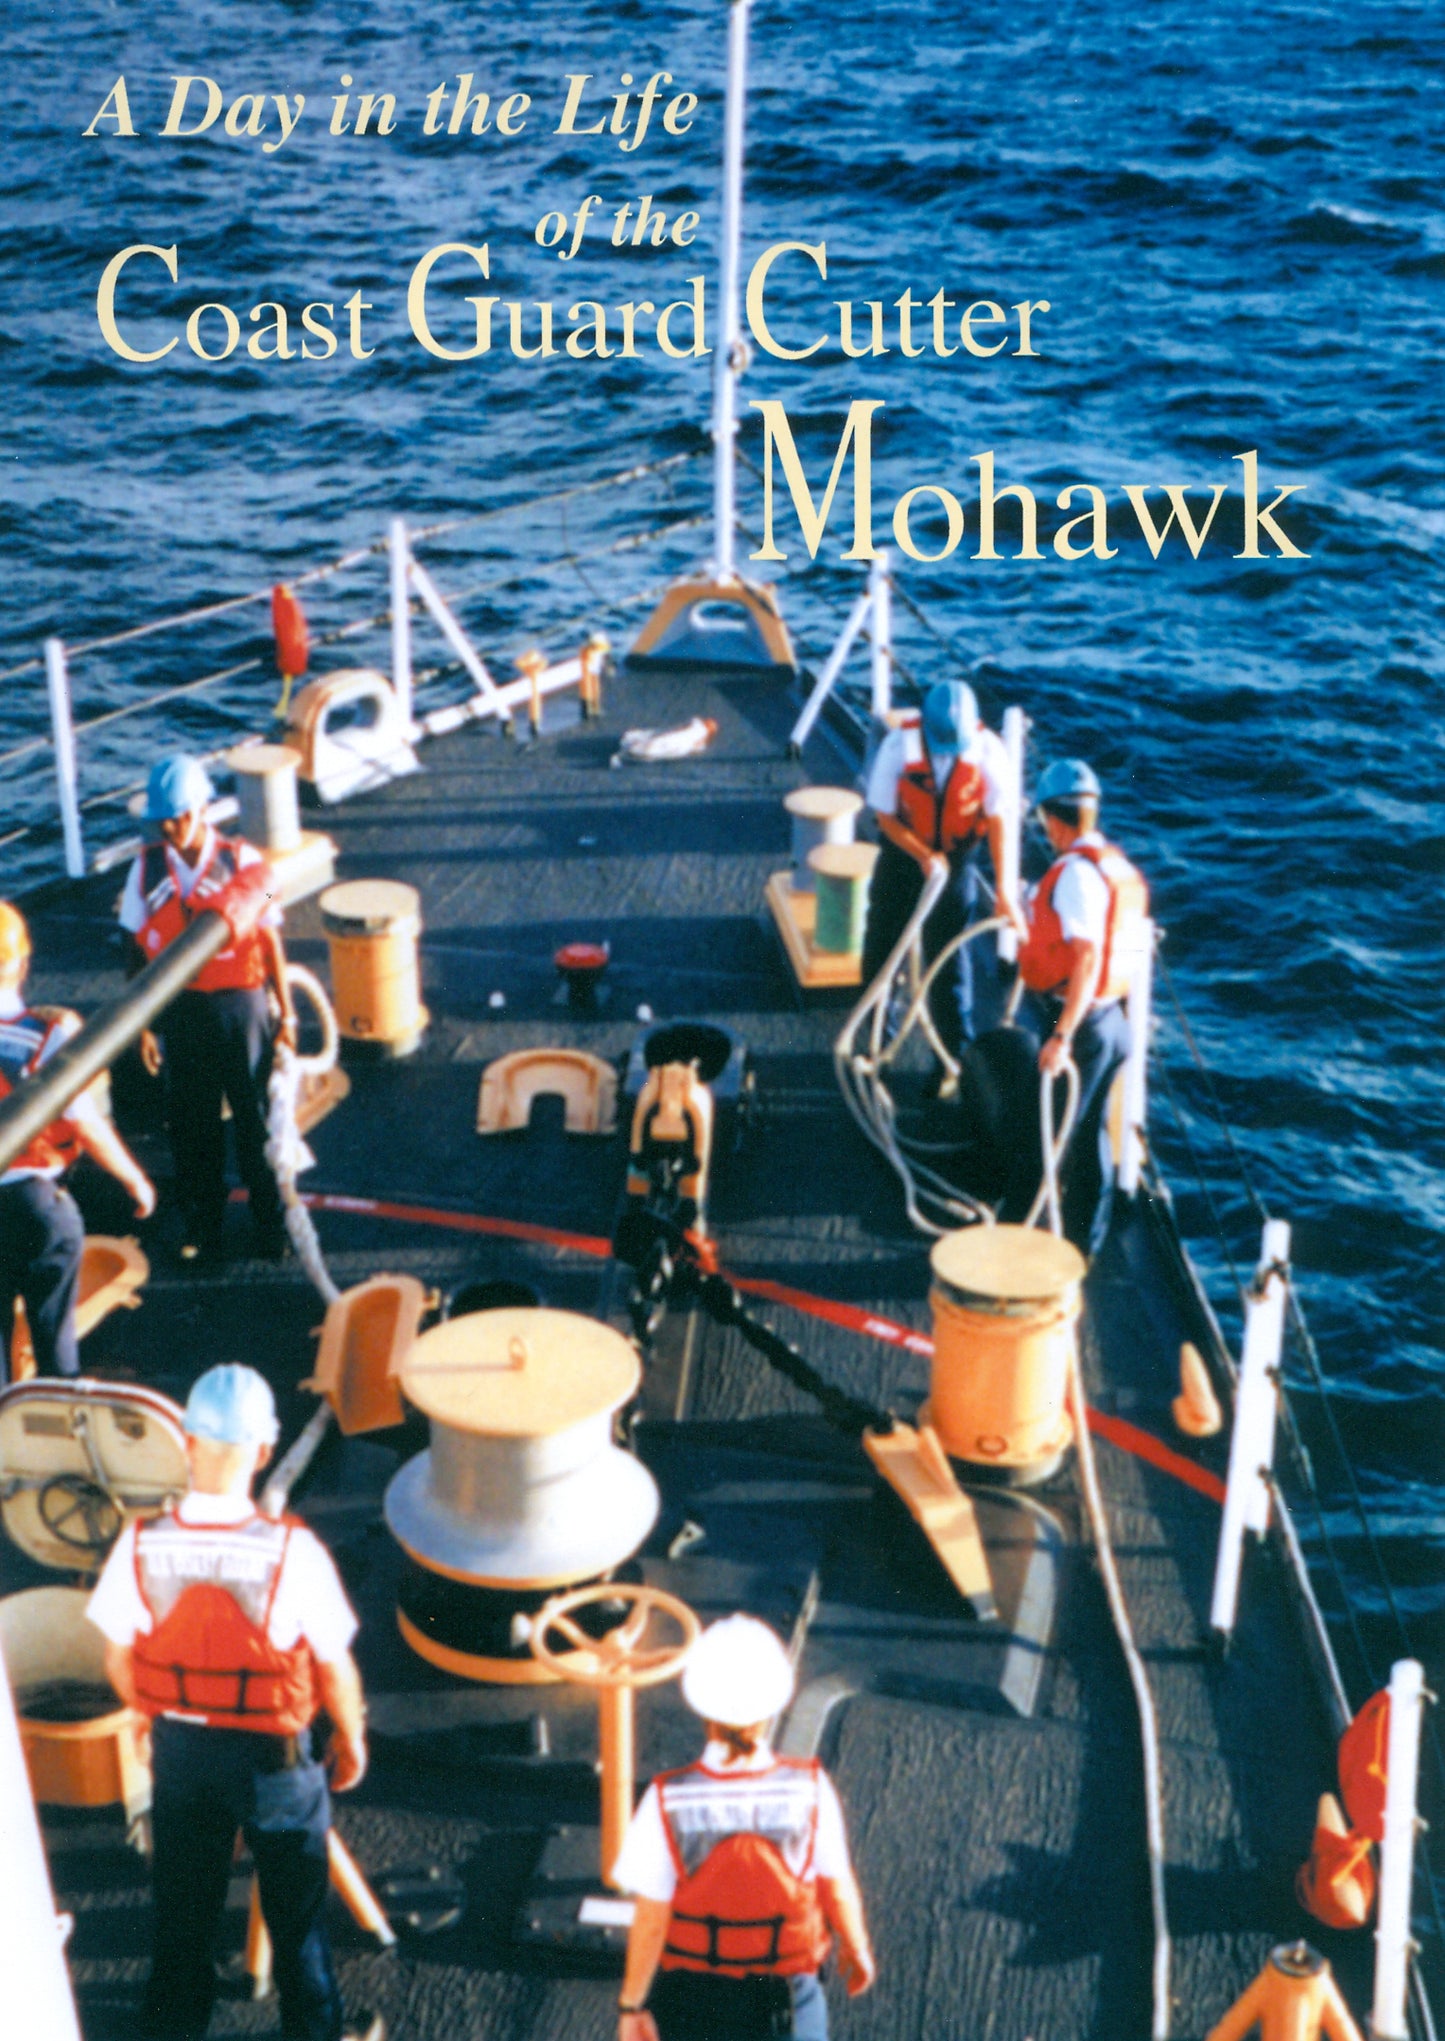 Day in the Life of the Coast Guard Cutter Mohawk cover art